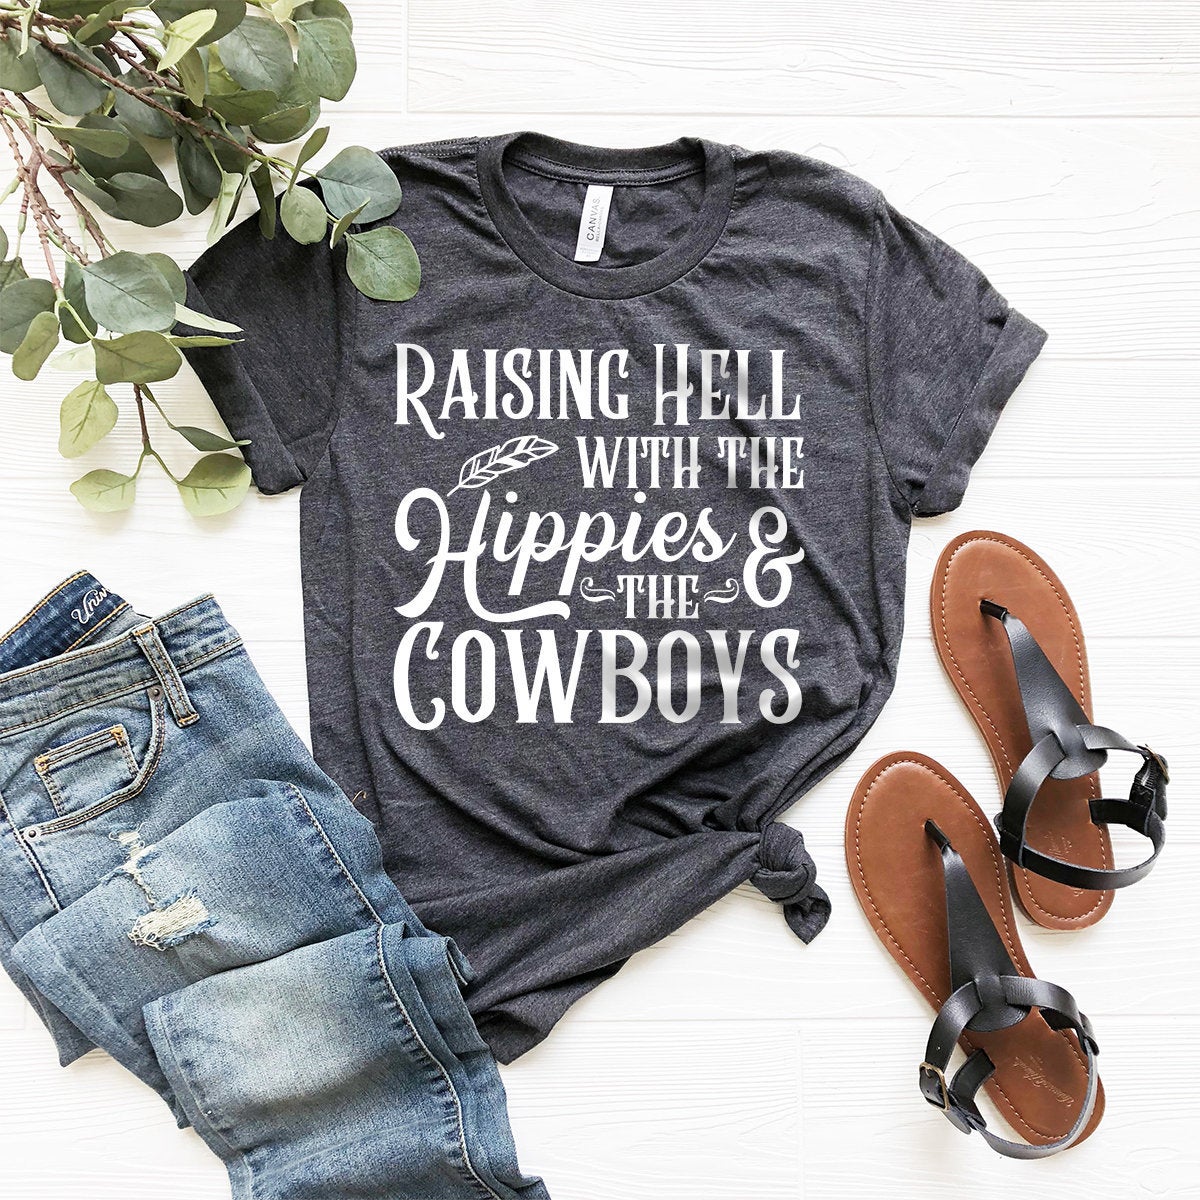 Raising Hell With The Hippies And The Cowboys Shirt, Country Music Tee, Southern Quotes Shirt, Country Western Shirt, Country Shirt - Fastdeliverytees.com